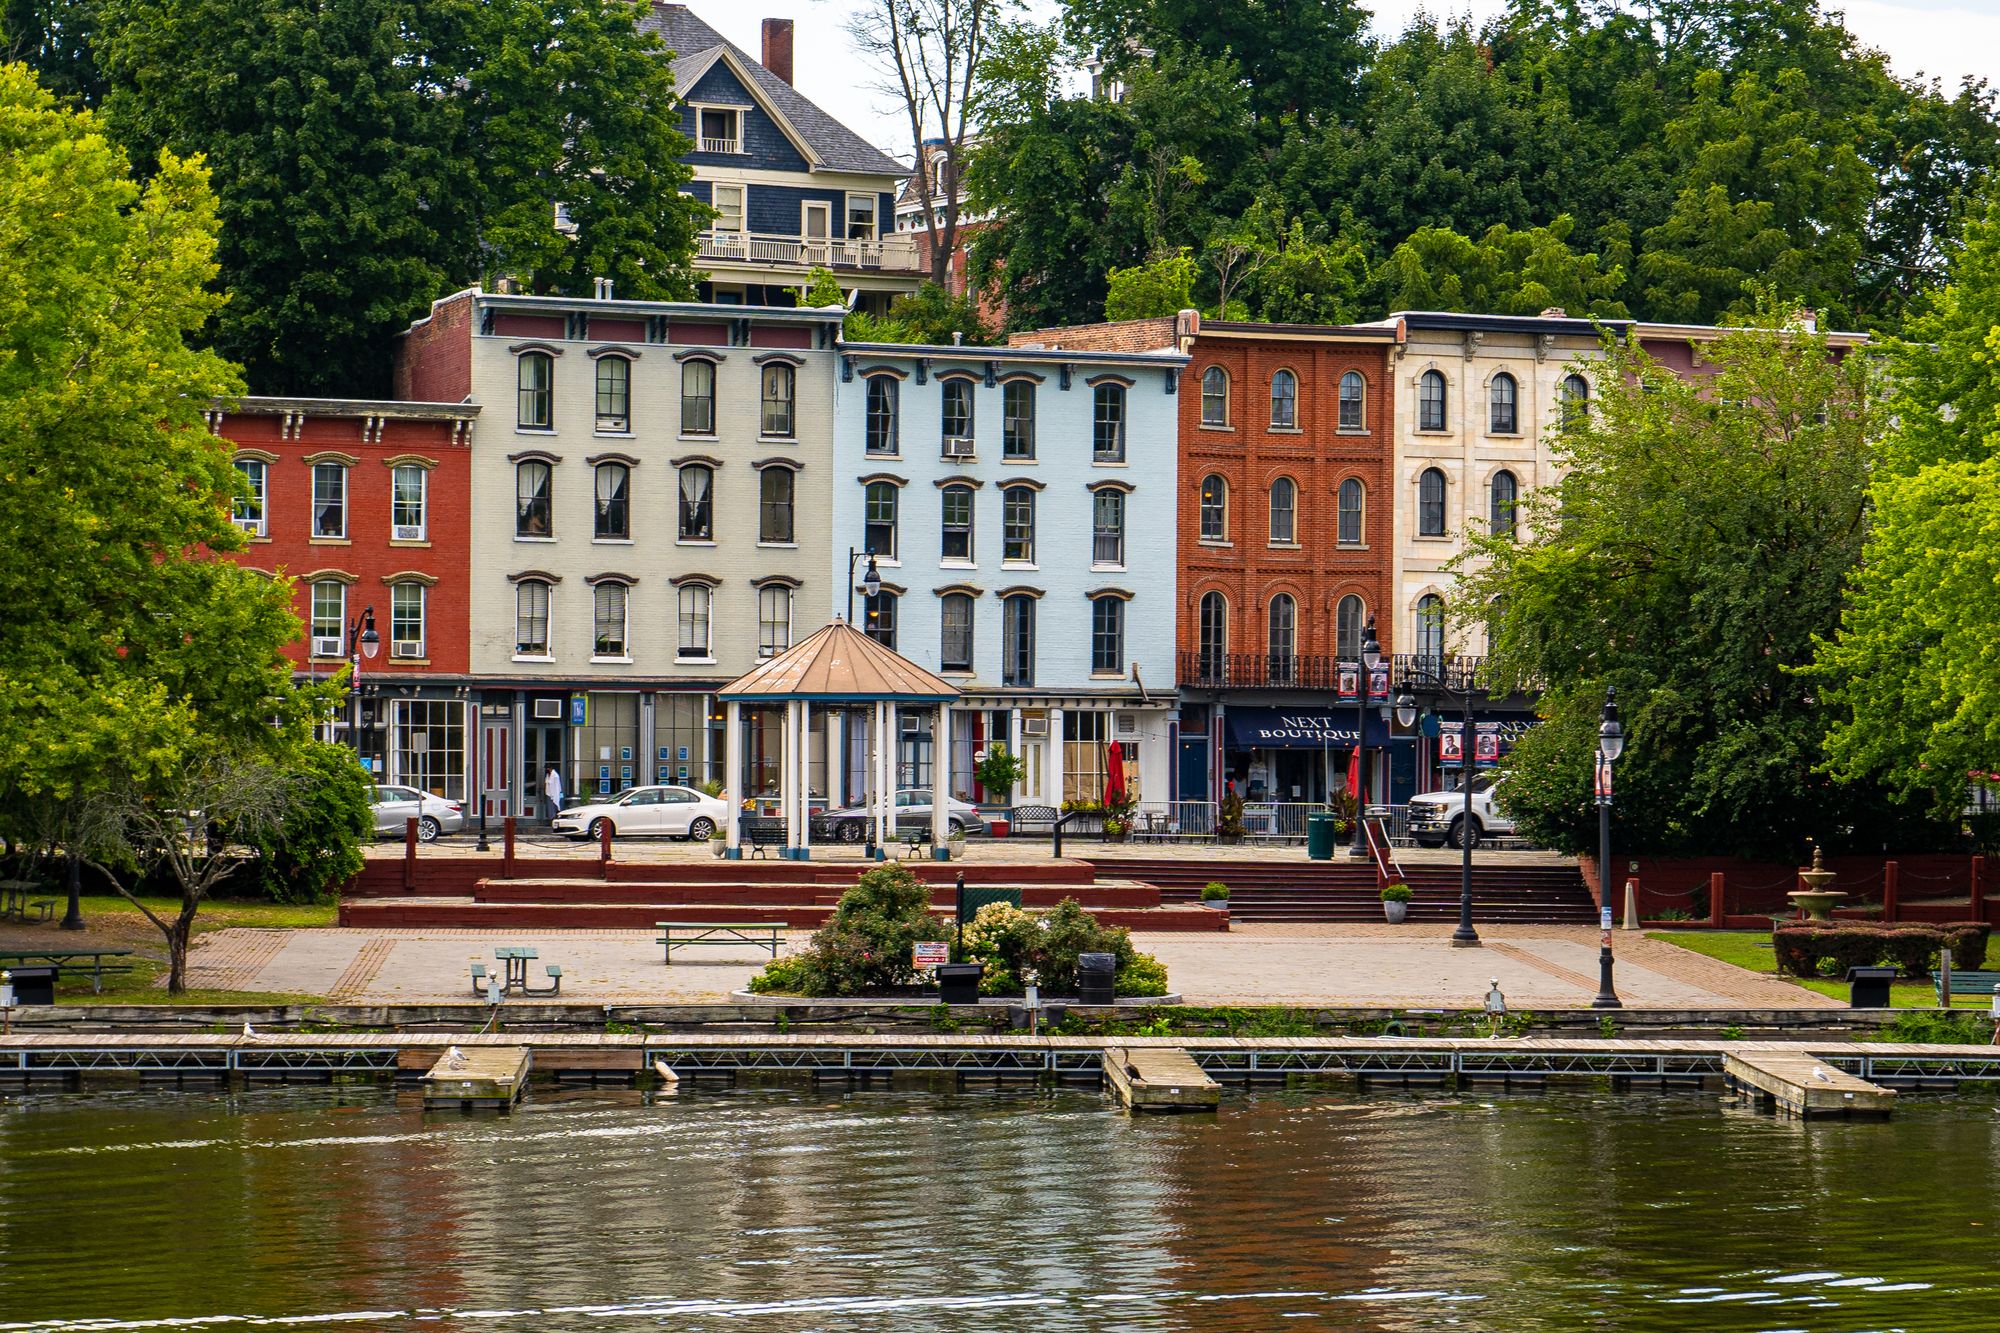 View of buildings on the Rondout district in Kingston NY